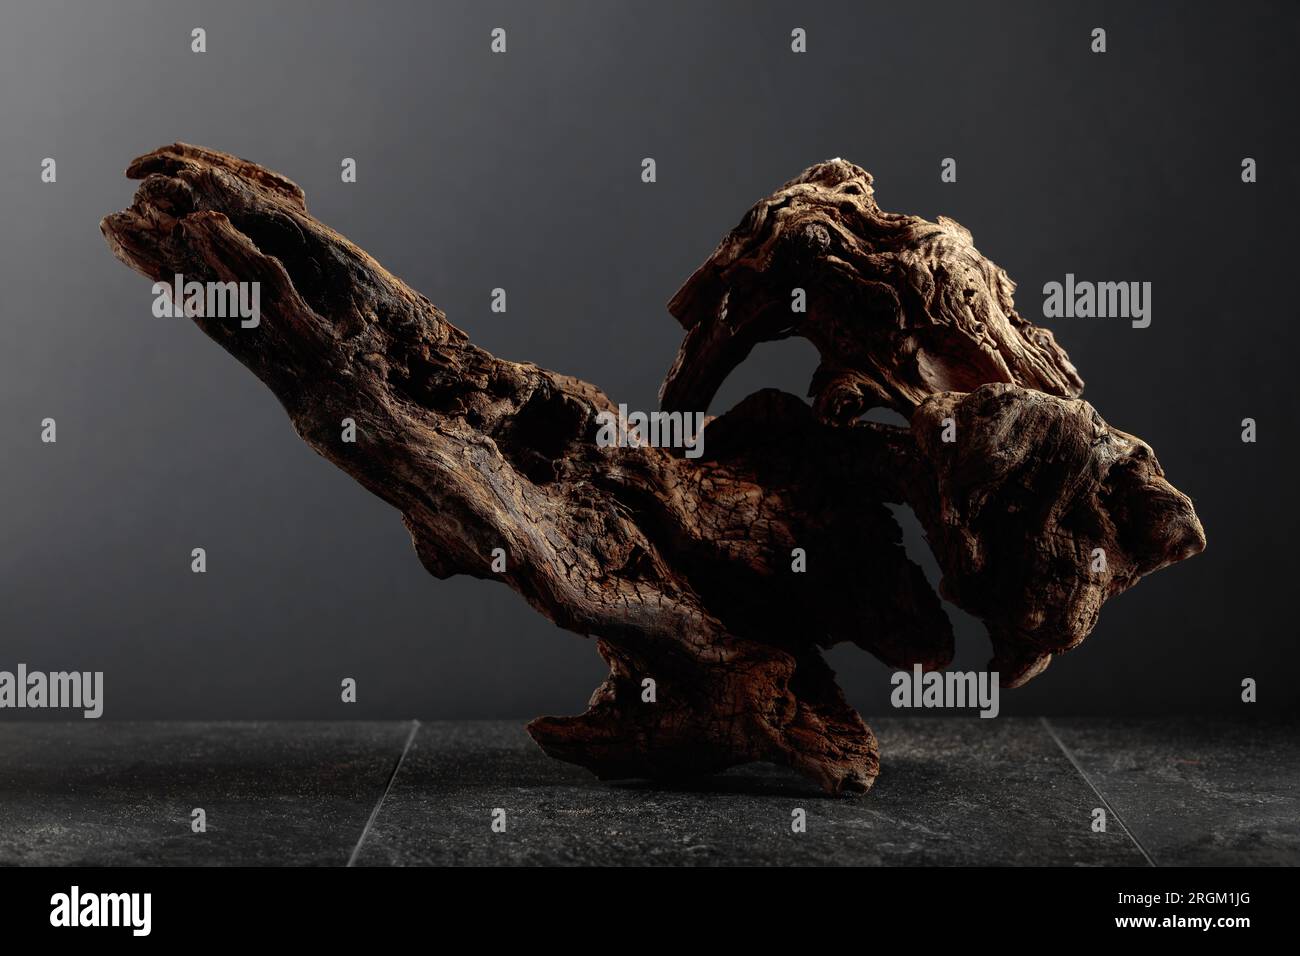 Old dry wooden snag on a black stone table. Black background with copy space. Stock Photo